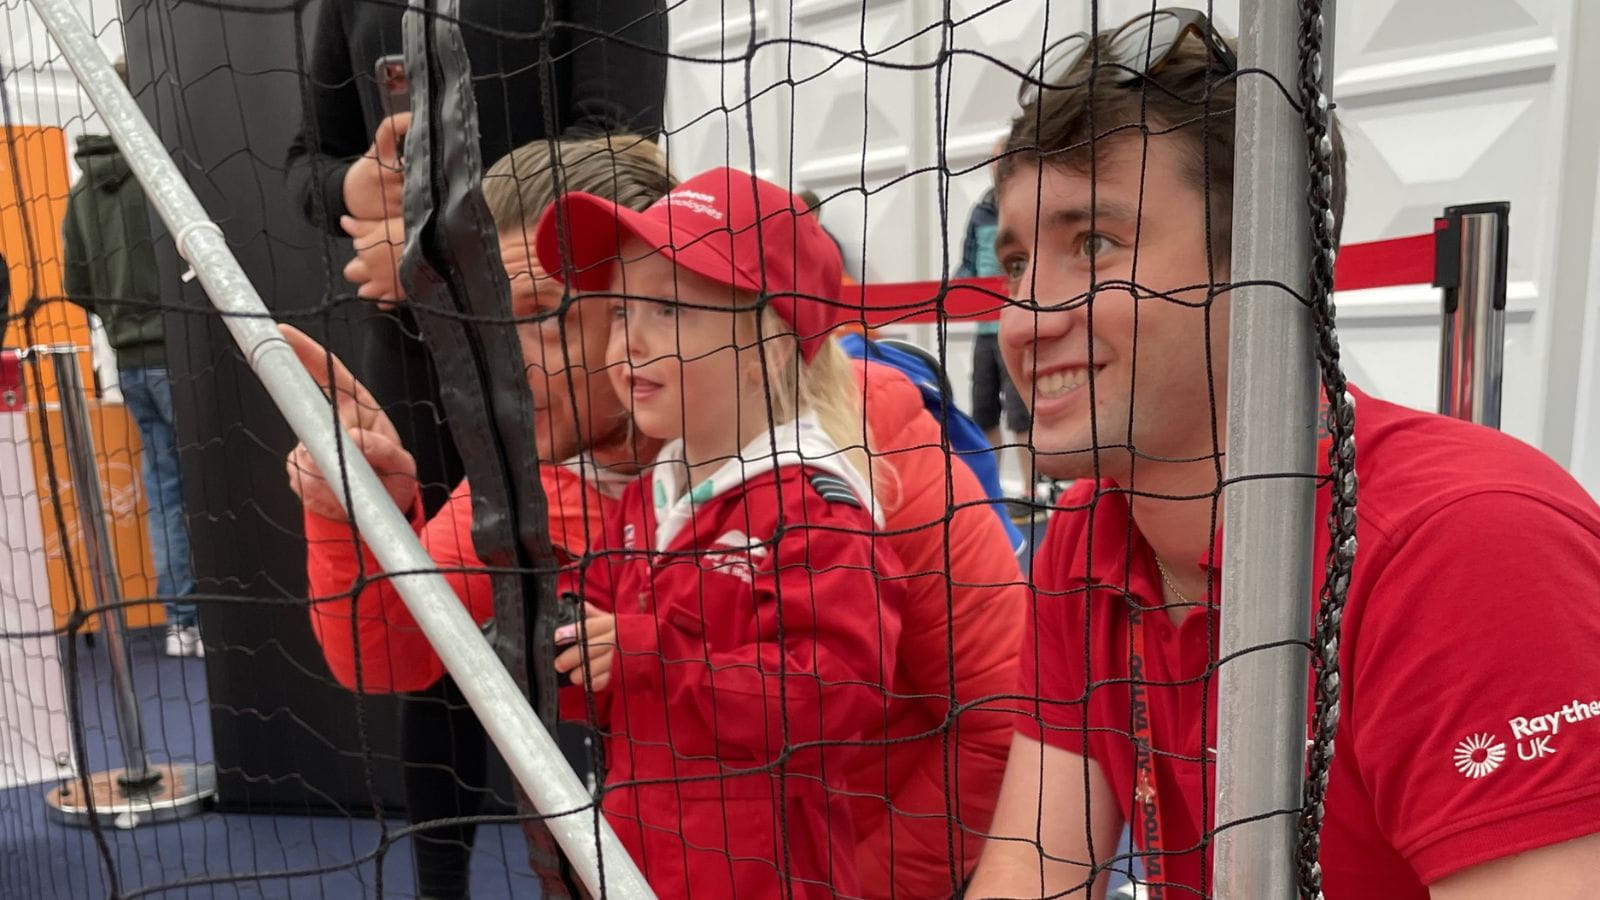 Side profile of a young man wearing a red Raytheon UK T-shirt, with sunglasses on his head. He is kneeling behind a mesh fence, smiling and looking up and to the left. Next to him is a small blonde girl of about three, in a red flight suit and a red Raytheon UK cap. Knelt down on the far side of her is a light-haired man in a red long-sleeve top, looking up and pointing to the top left. 